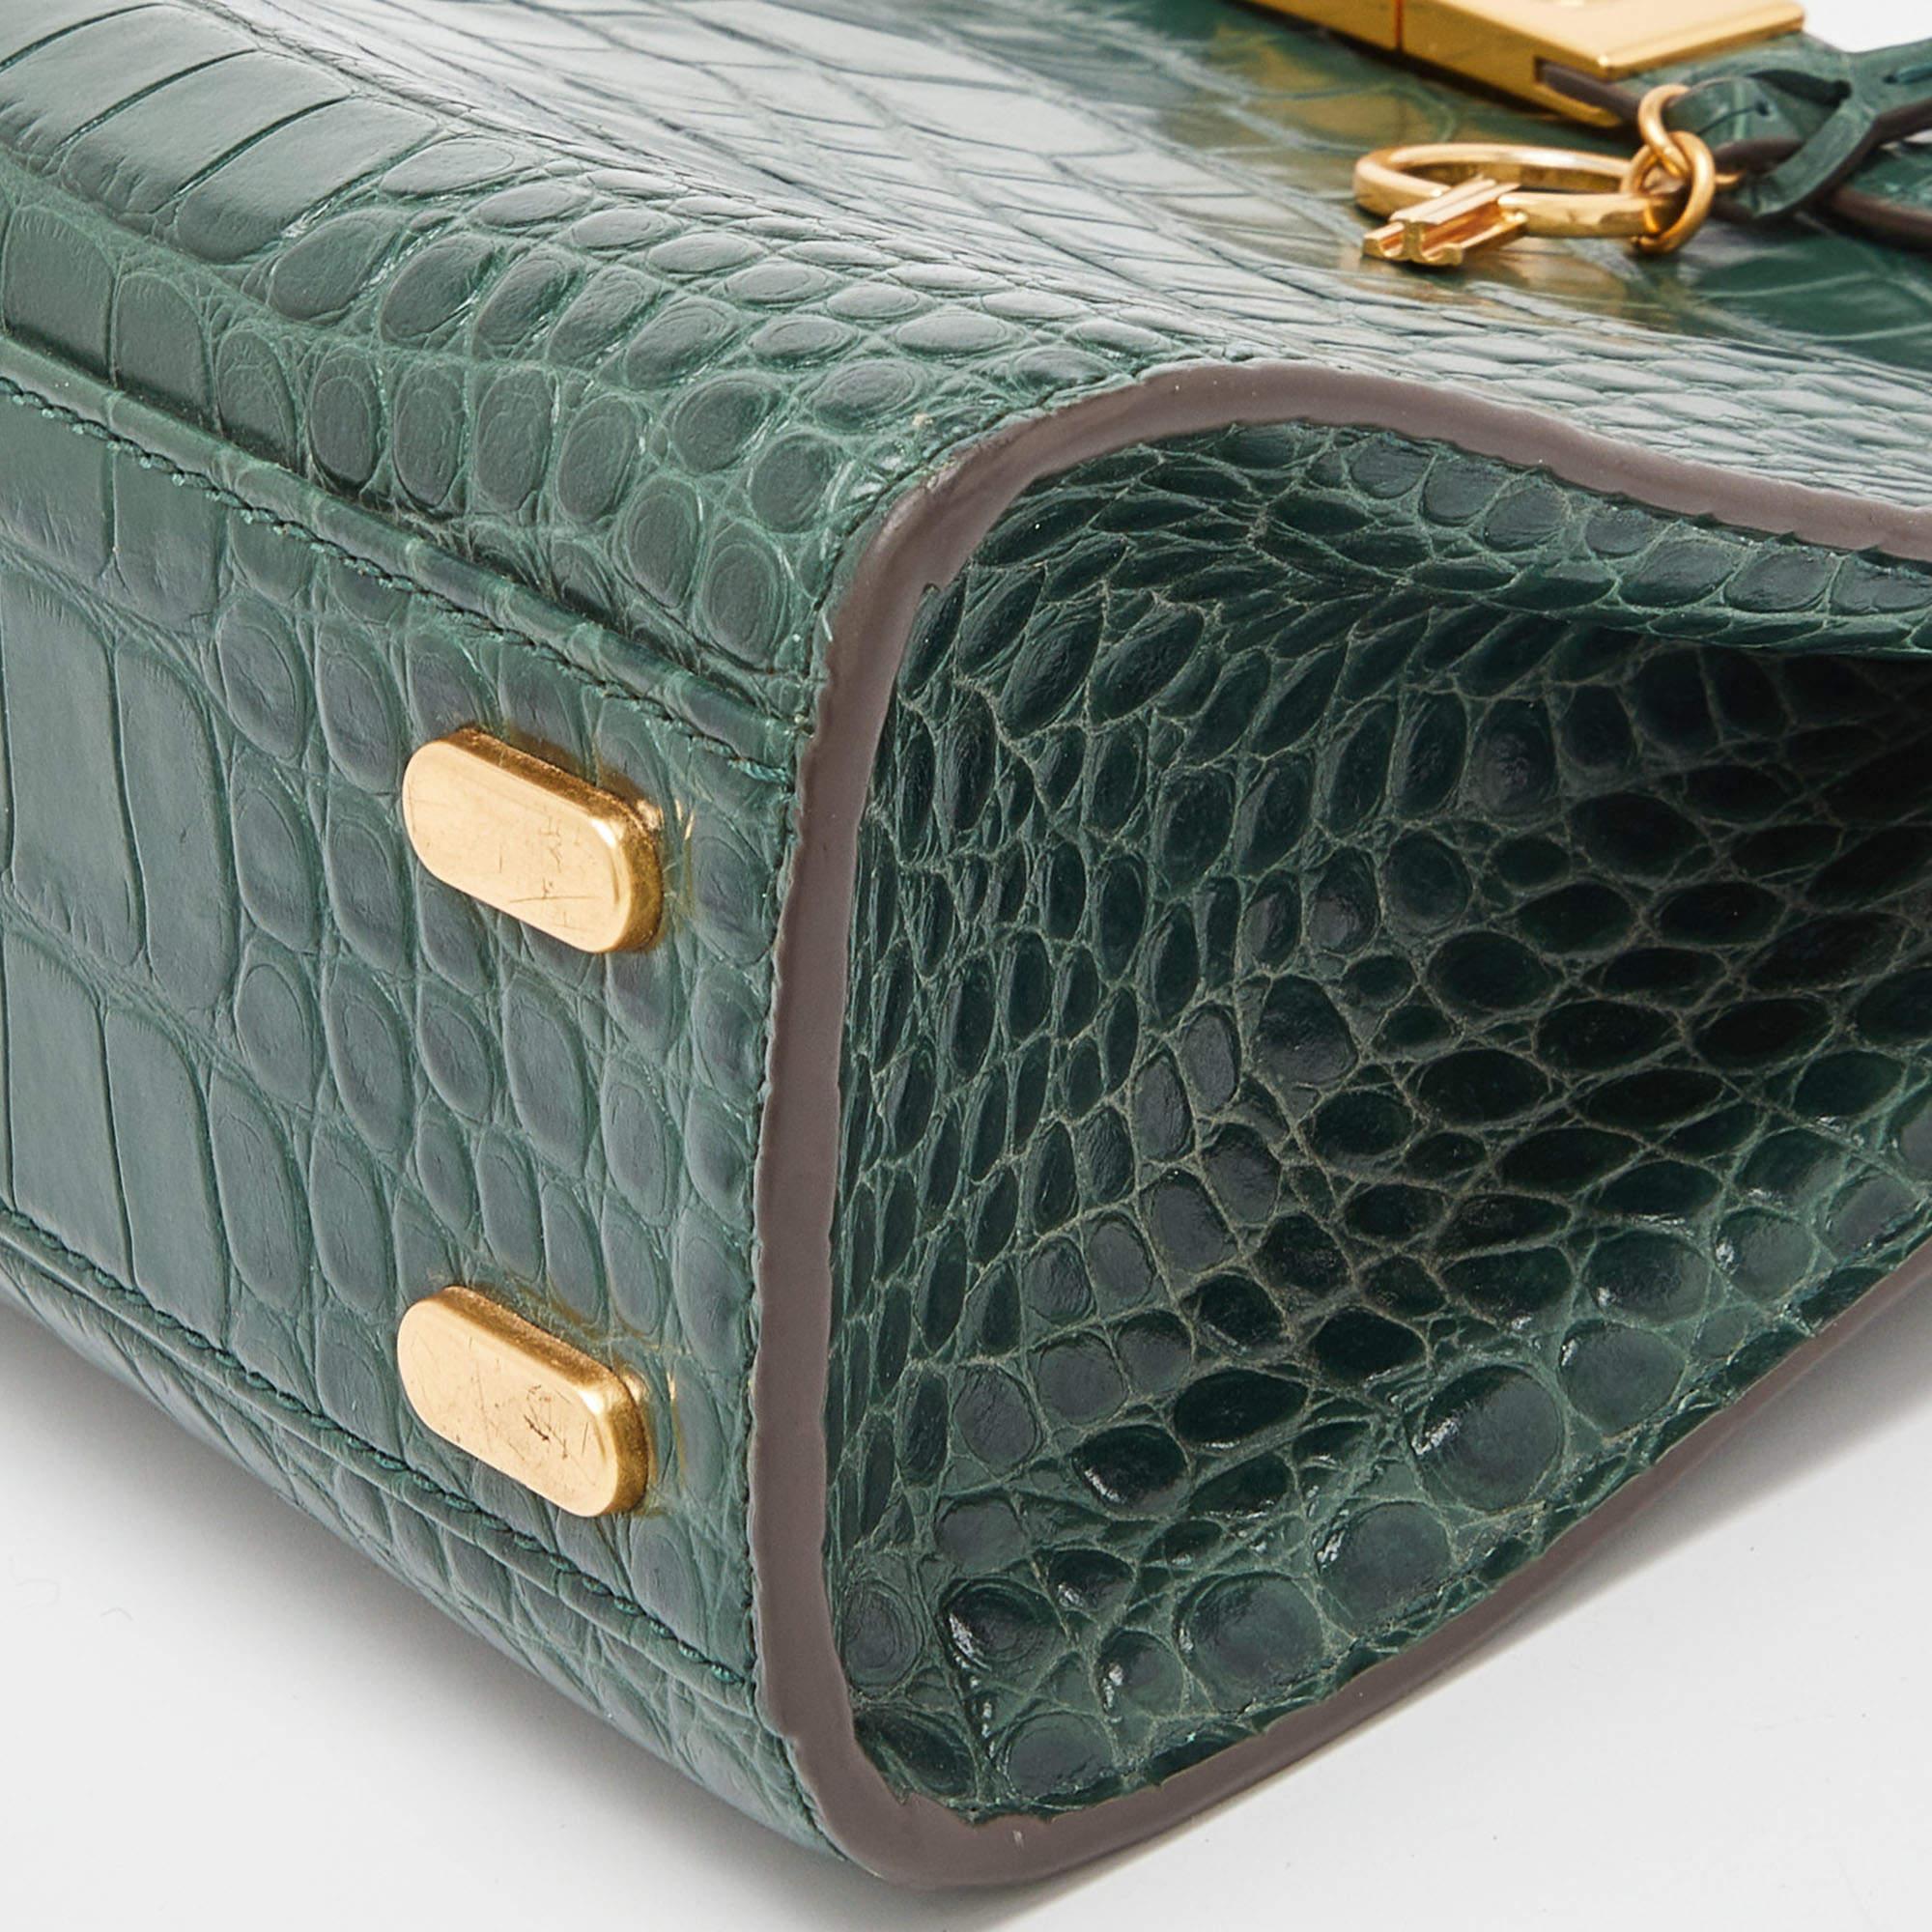 Tory Burch Green Croc Embossed Leather Lee Radziwill Top Handle Bag 5